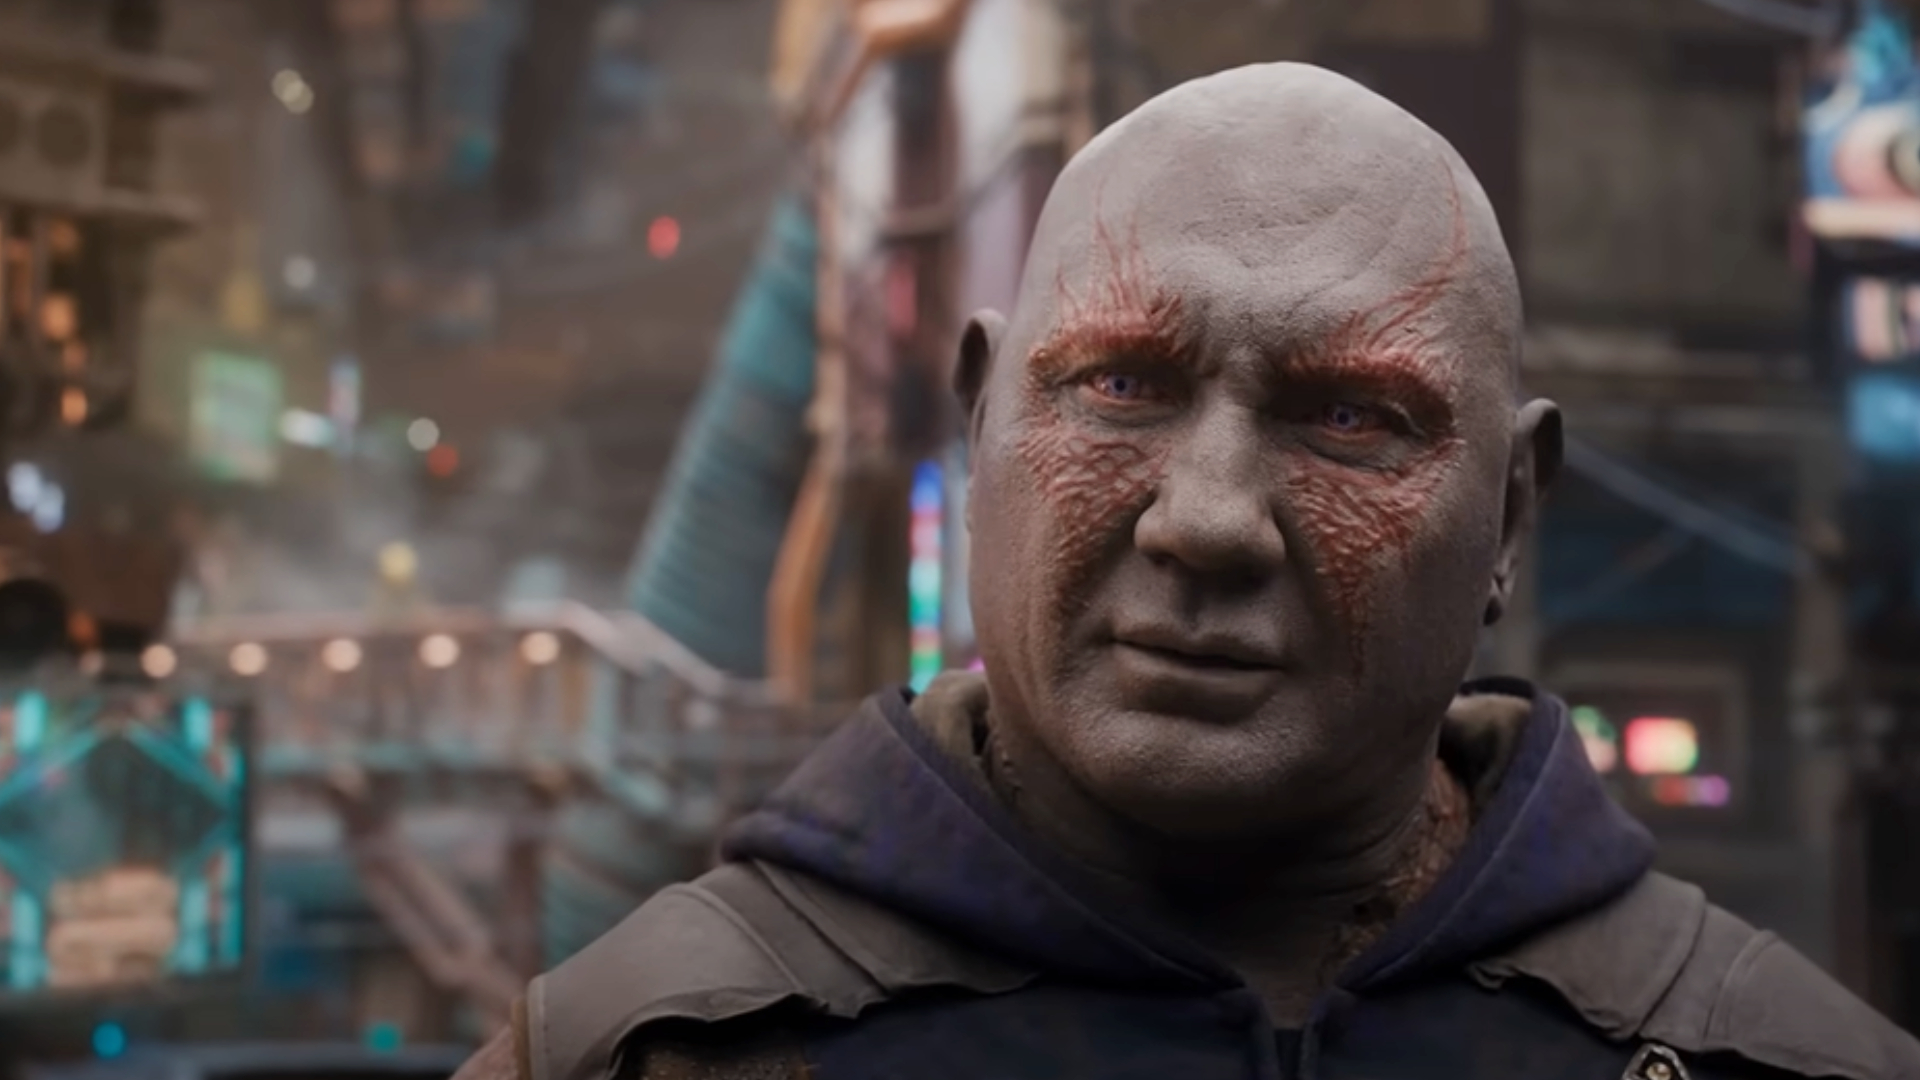 Guardians of the Galaxy' actor Dave Bautista says making those movies  'wasn't all pleasant' 